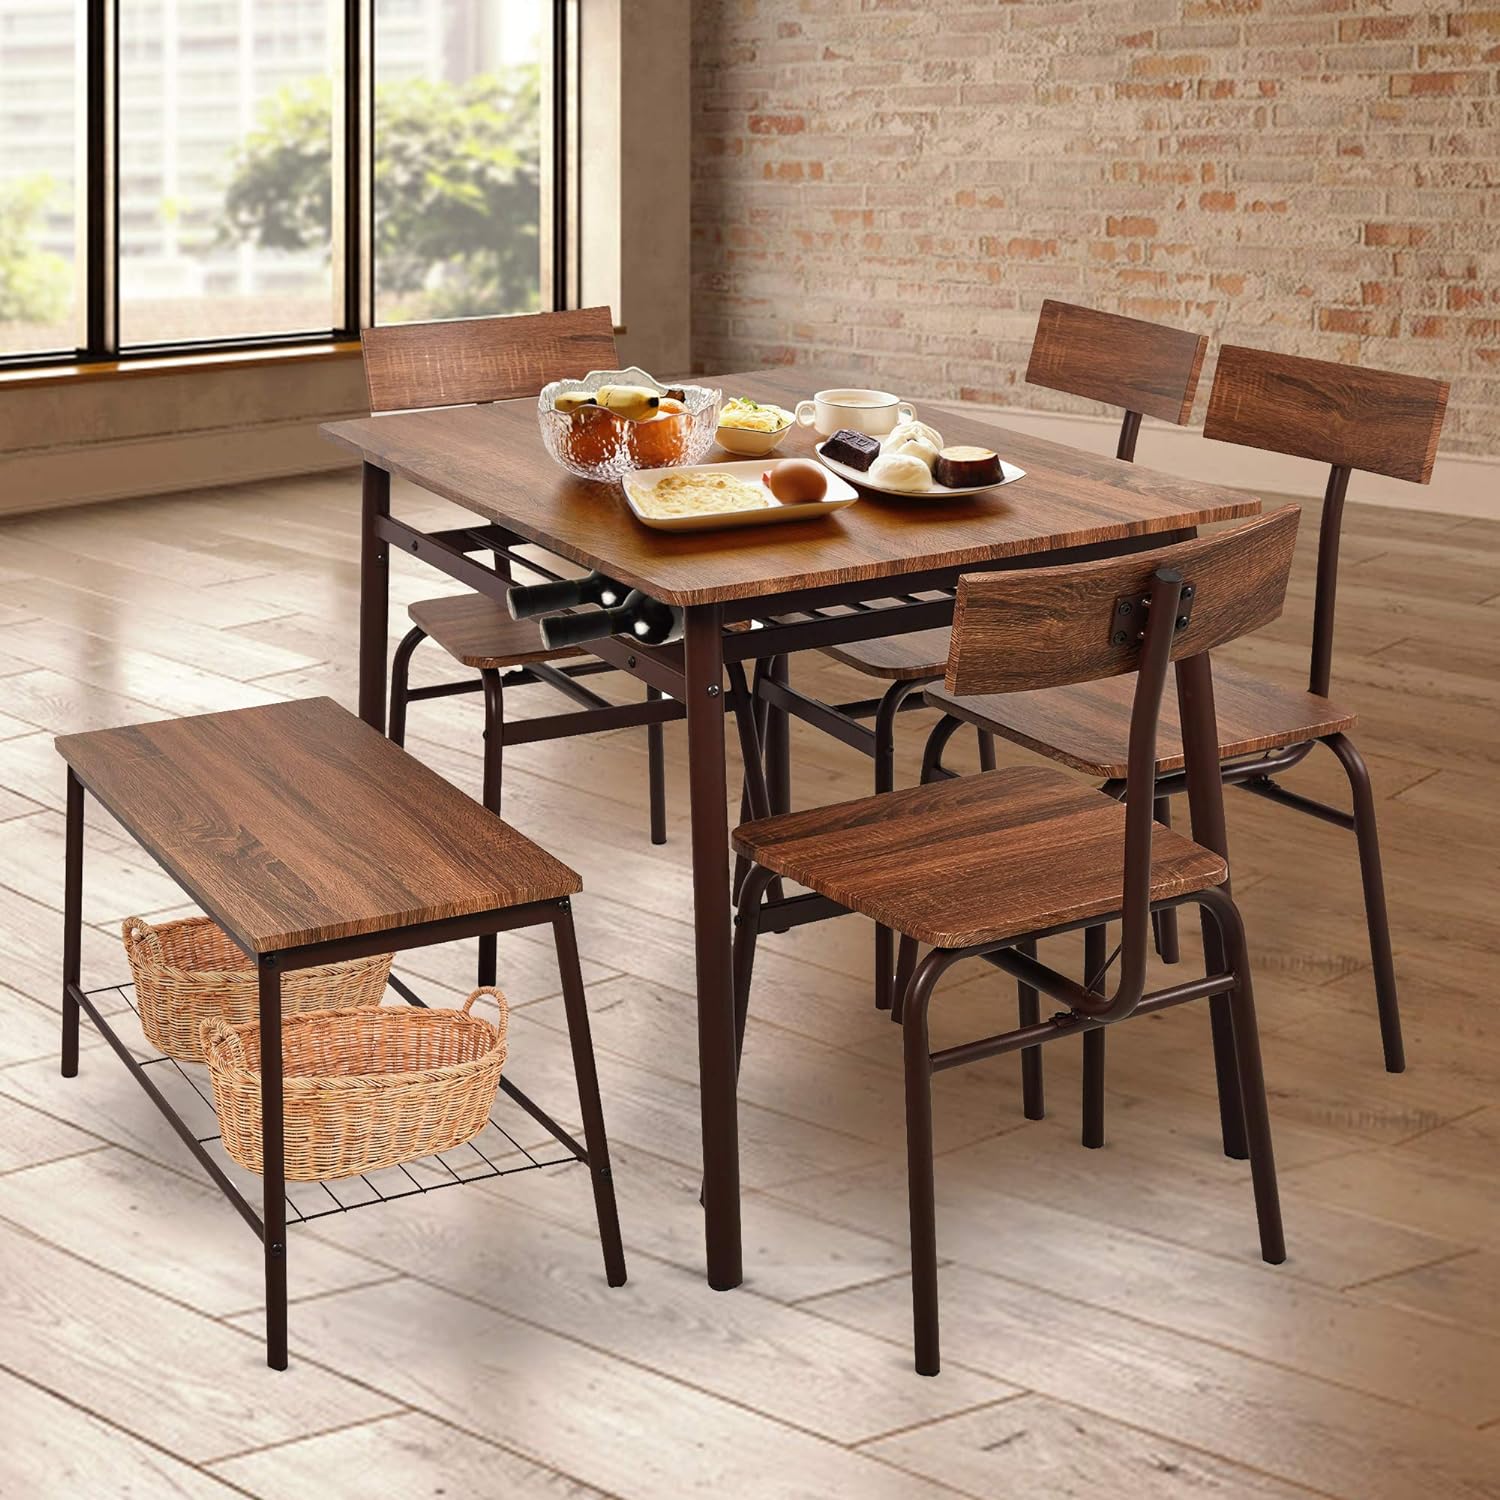 6 Piece Dining Table Set, 1 Dining Table 43.3" for 4-6 with 4 Dining Chairs and 1 Bench Compact Wooden Dinette, Wood Backrest